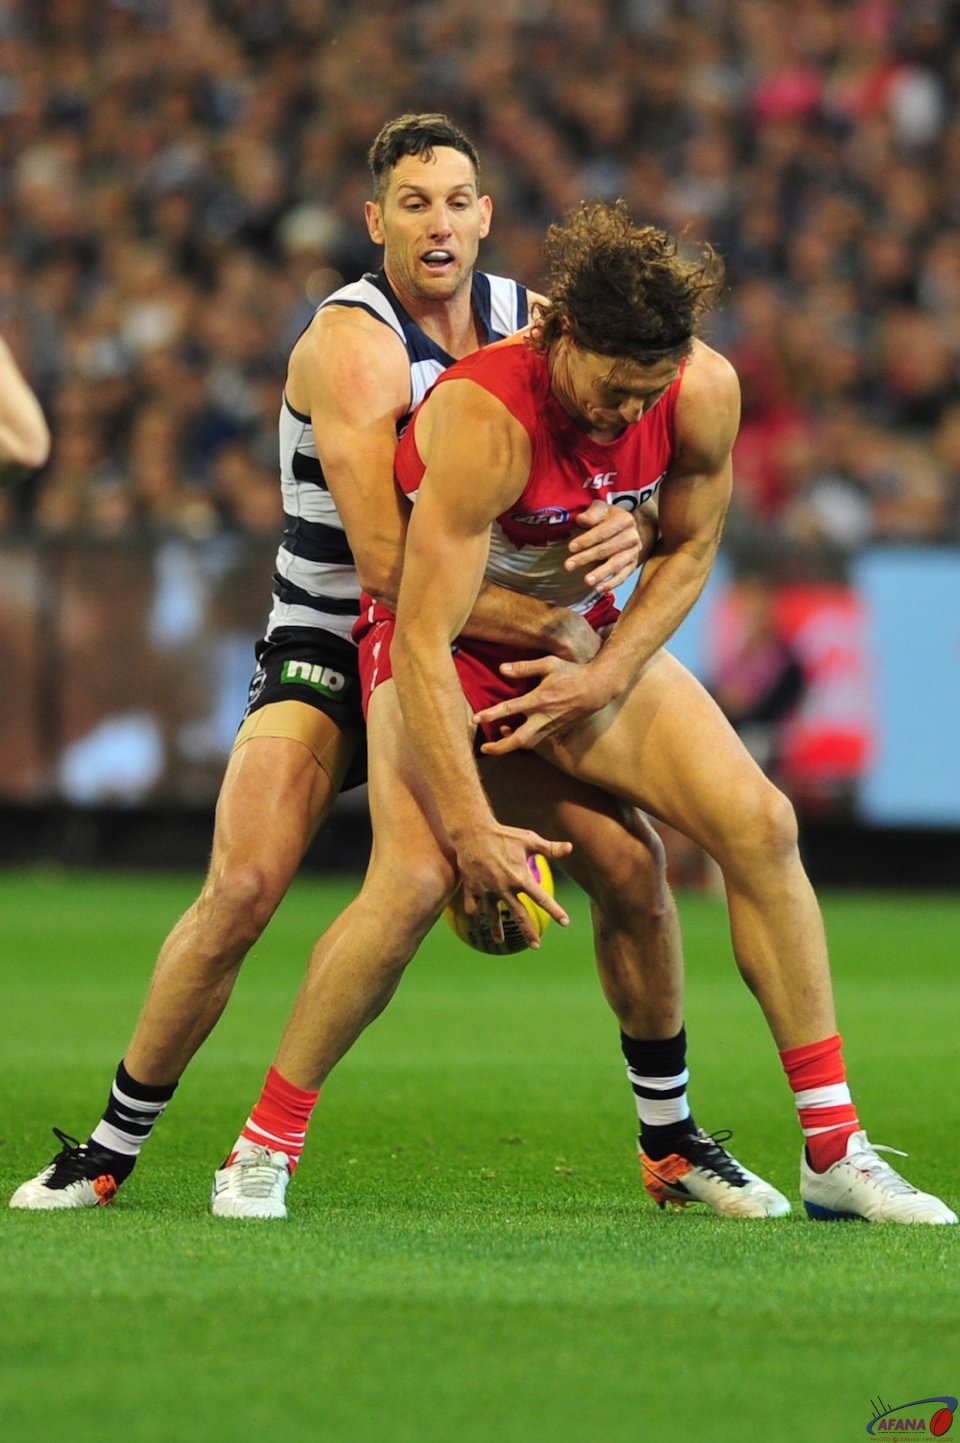 Tippett and Taylor contest the ball in